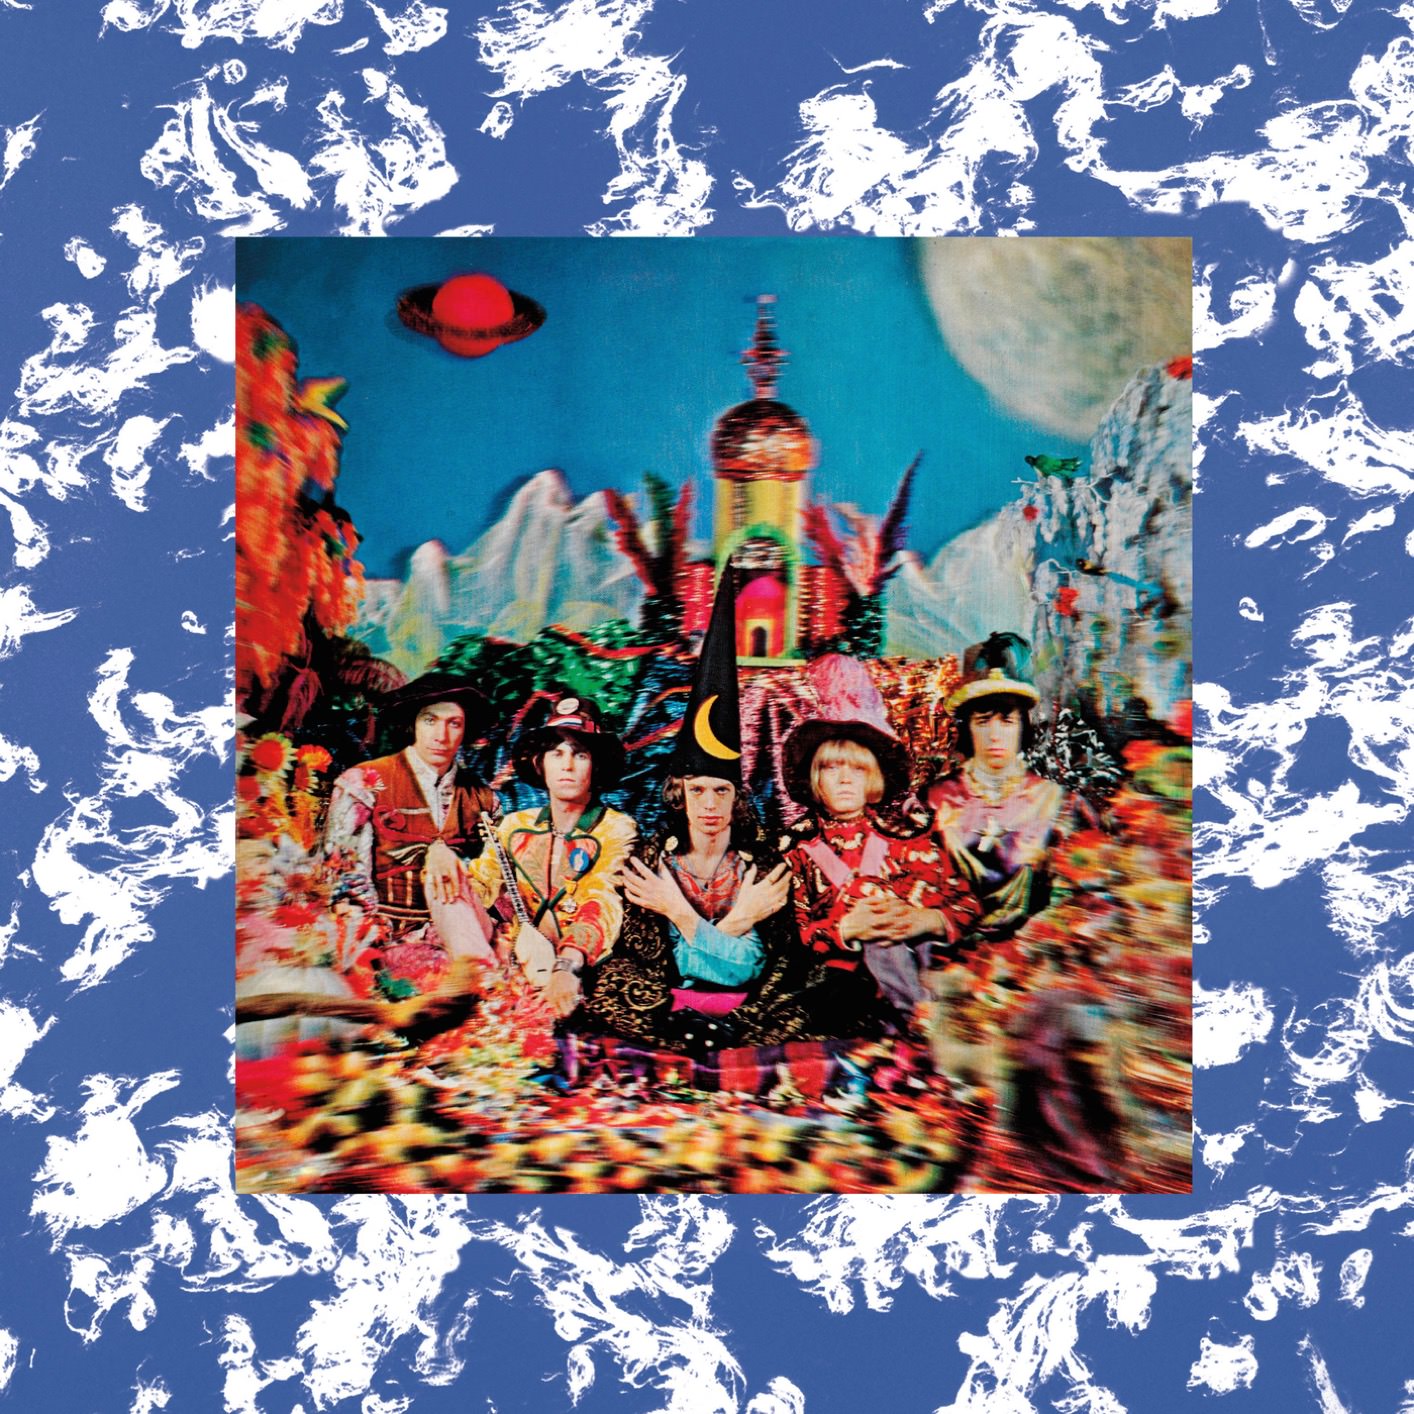 The Rolling Stones - Their Satanic Majesties Request {50th Anniversary Edition} (1967/2017) [HDTracks FLAC 24bit/192kHz]